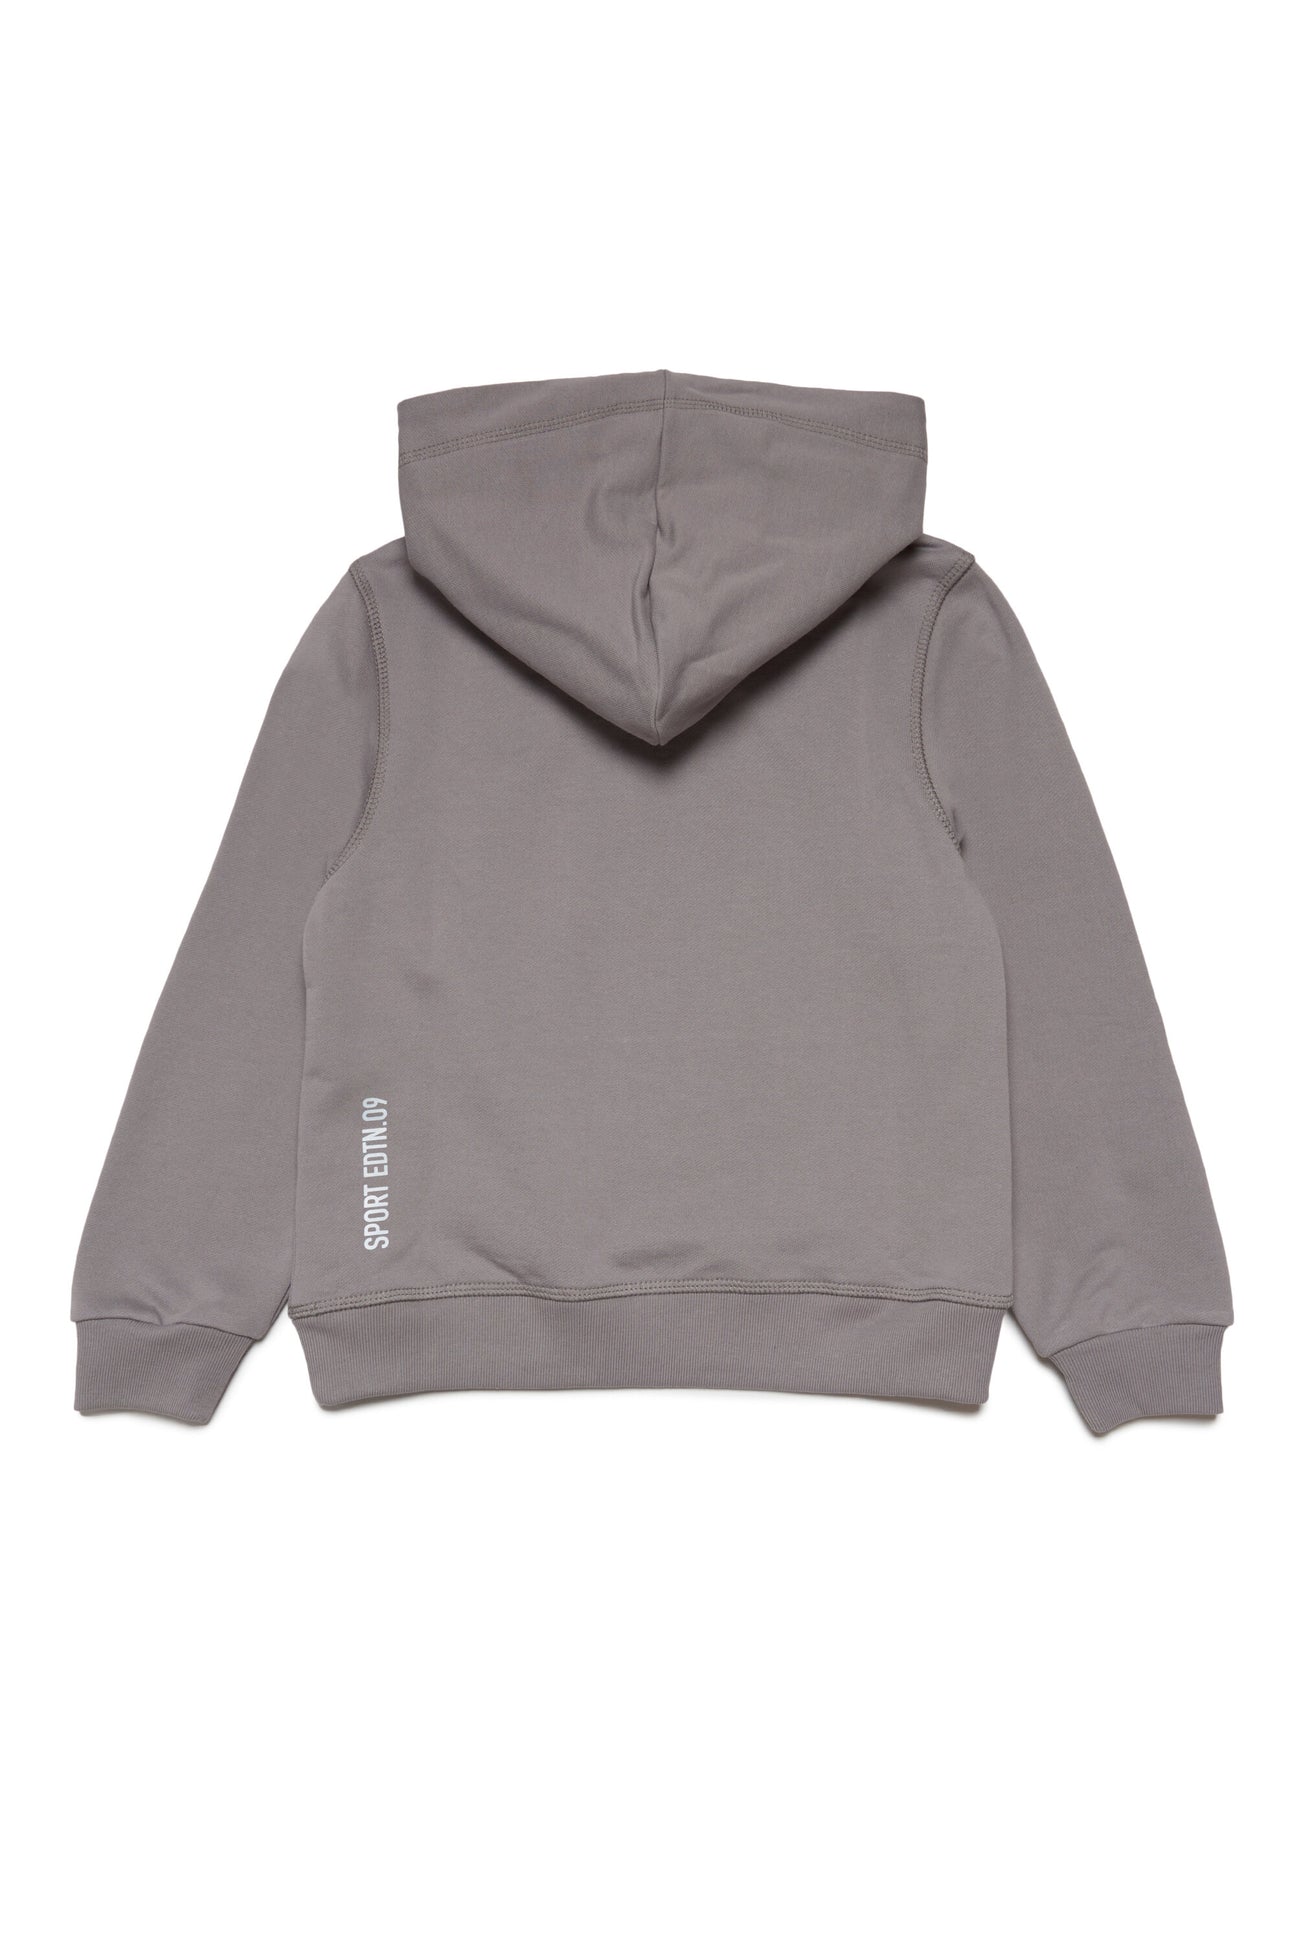 Hooded sweatshirt with two-color Leaf graphics Hooded sweatshirt with two-color Leaf graphics